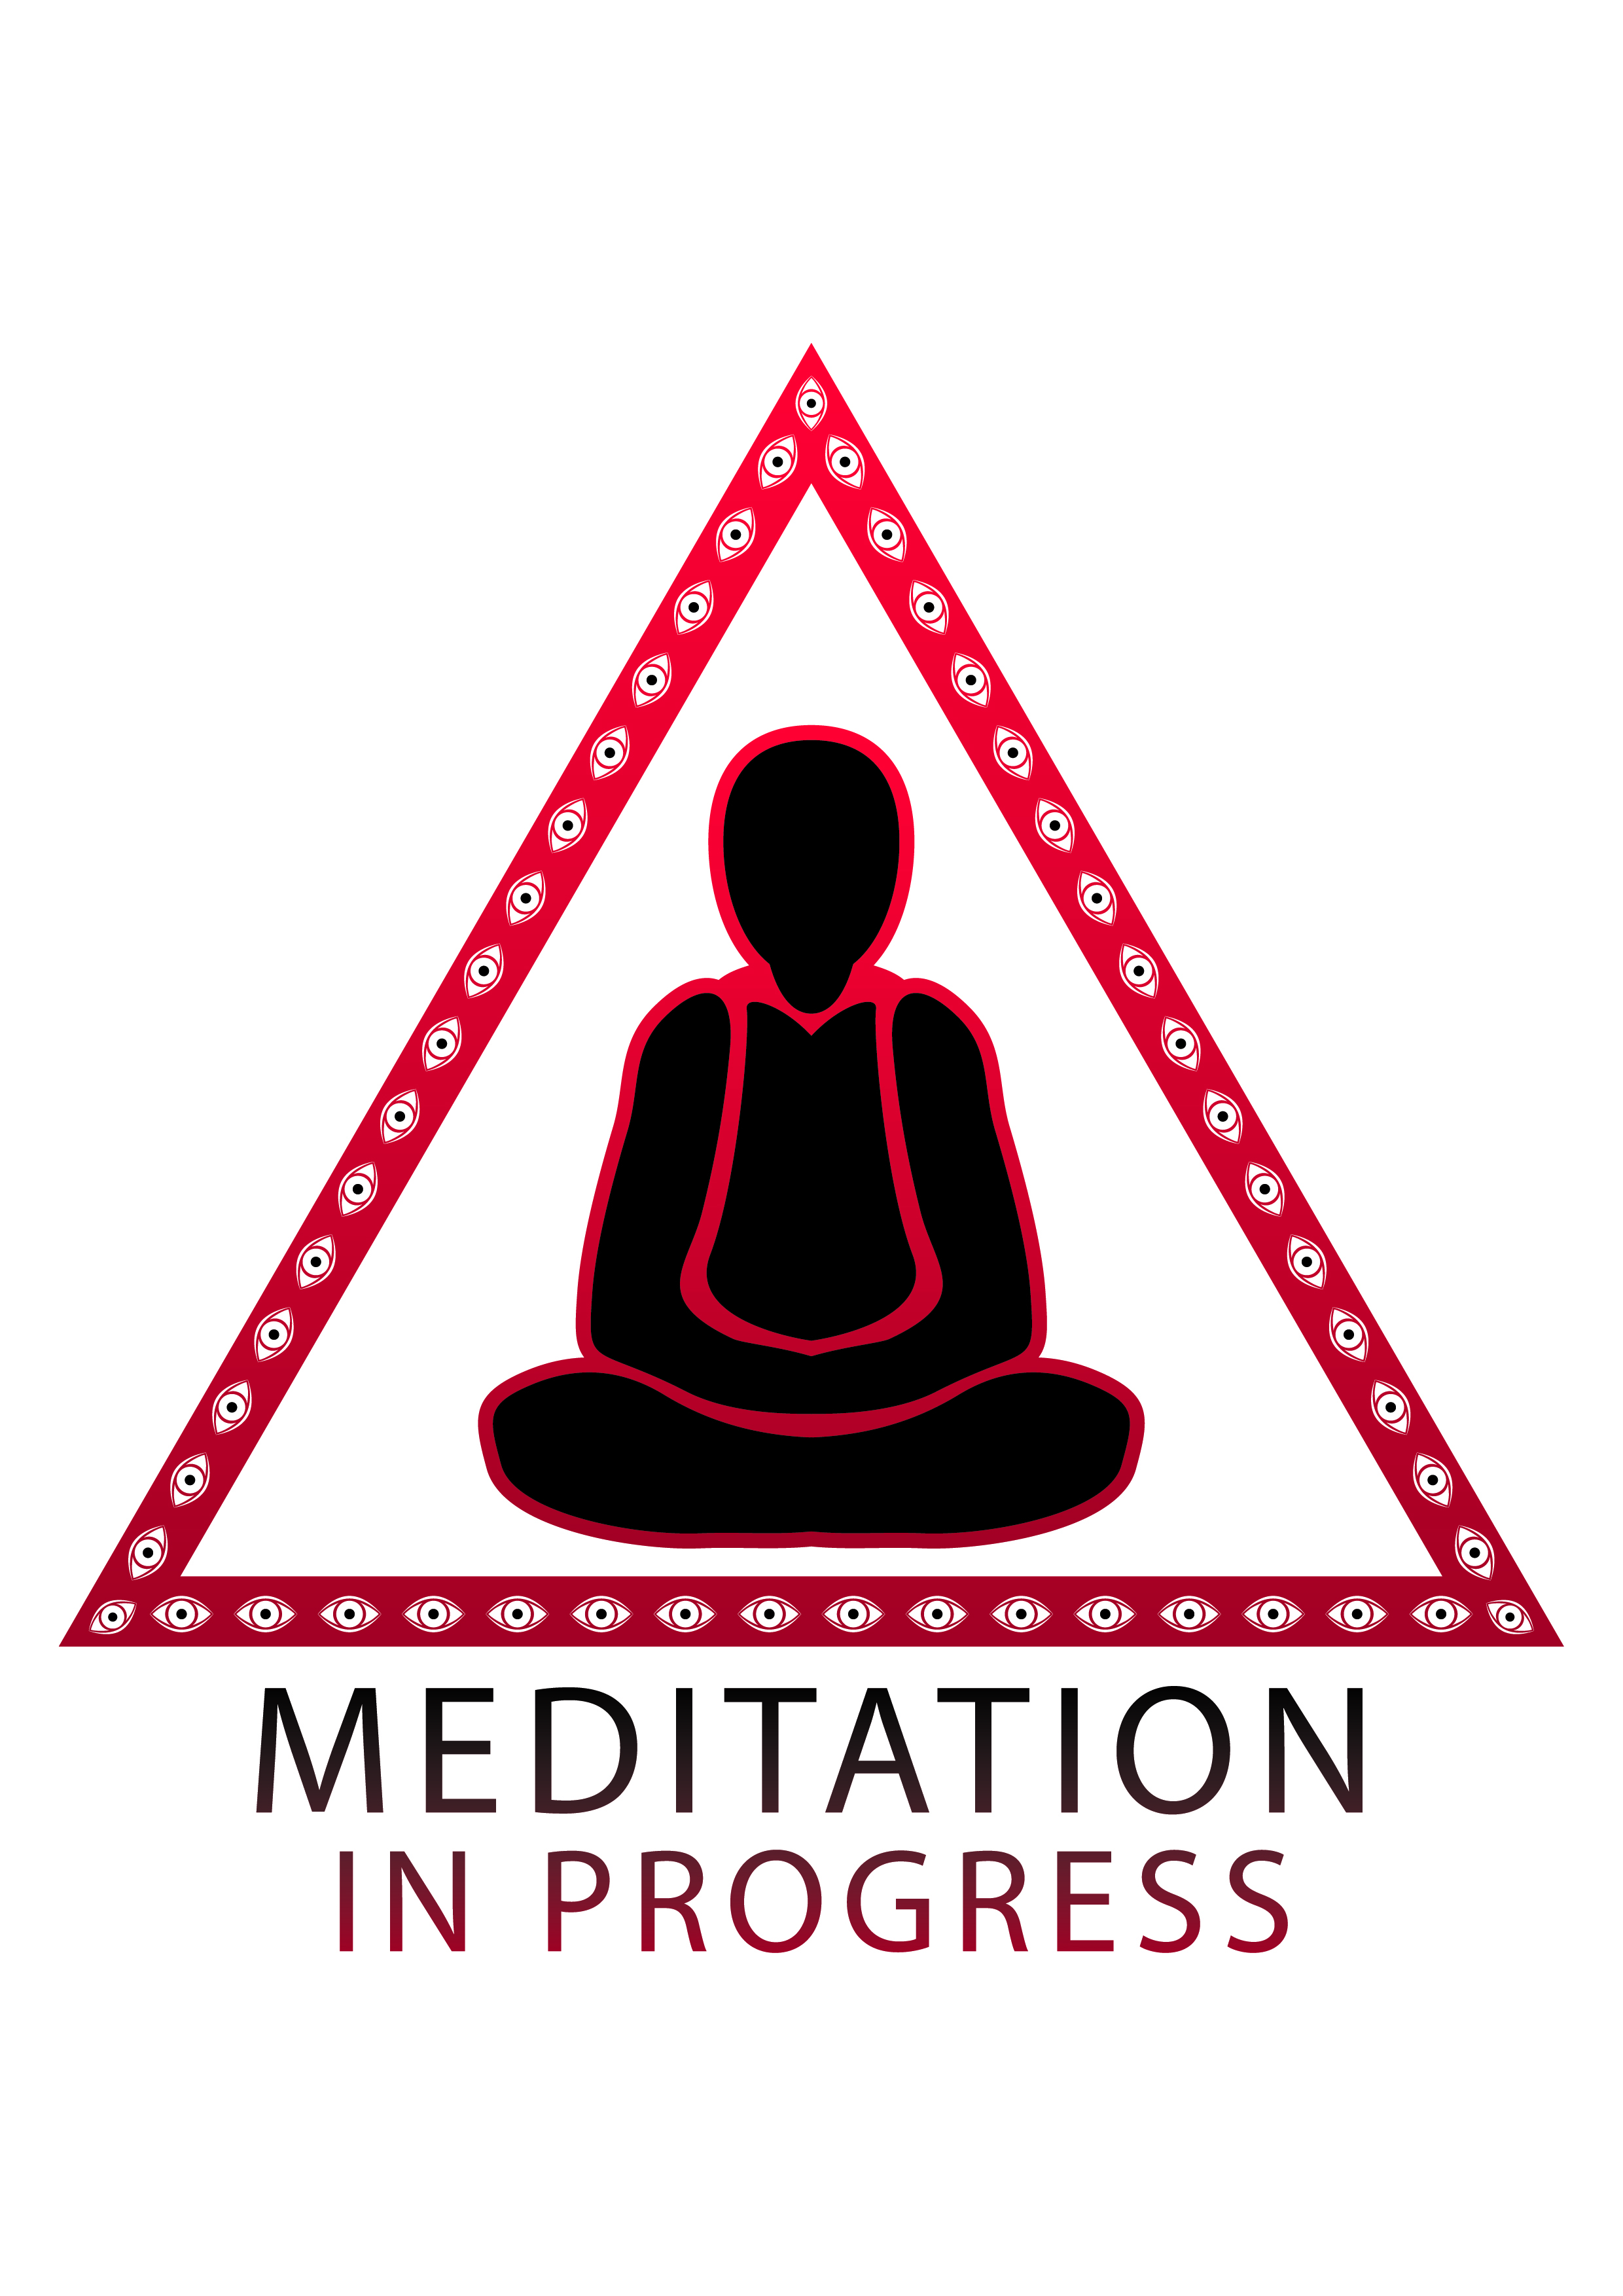 One Review Assails That Meditation Applying Deep Breathing To Lower Stress 4